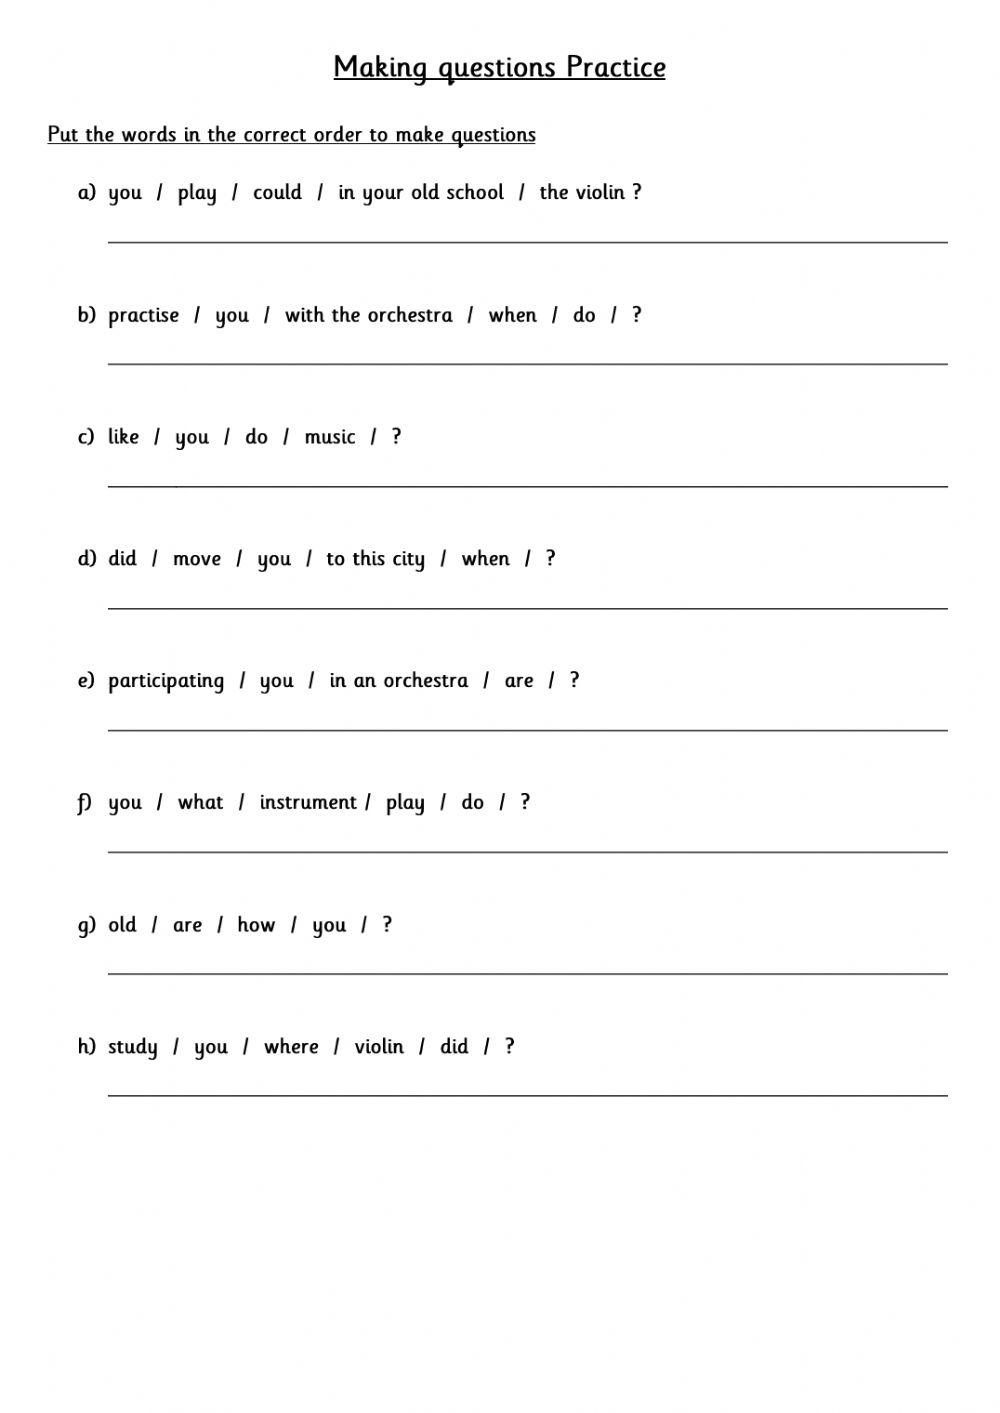 Making question practice